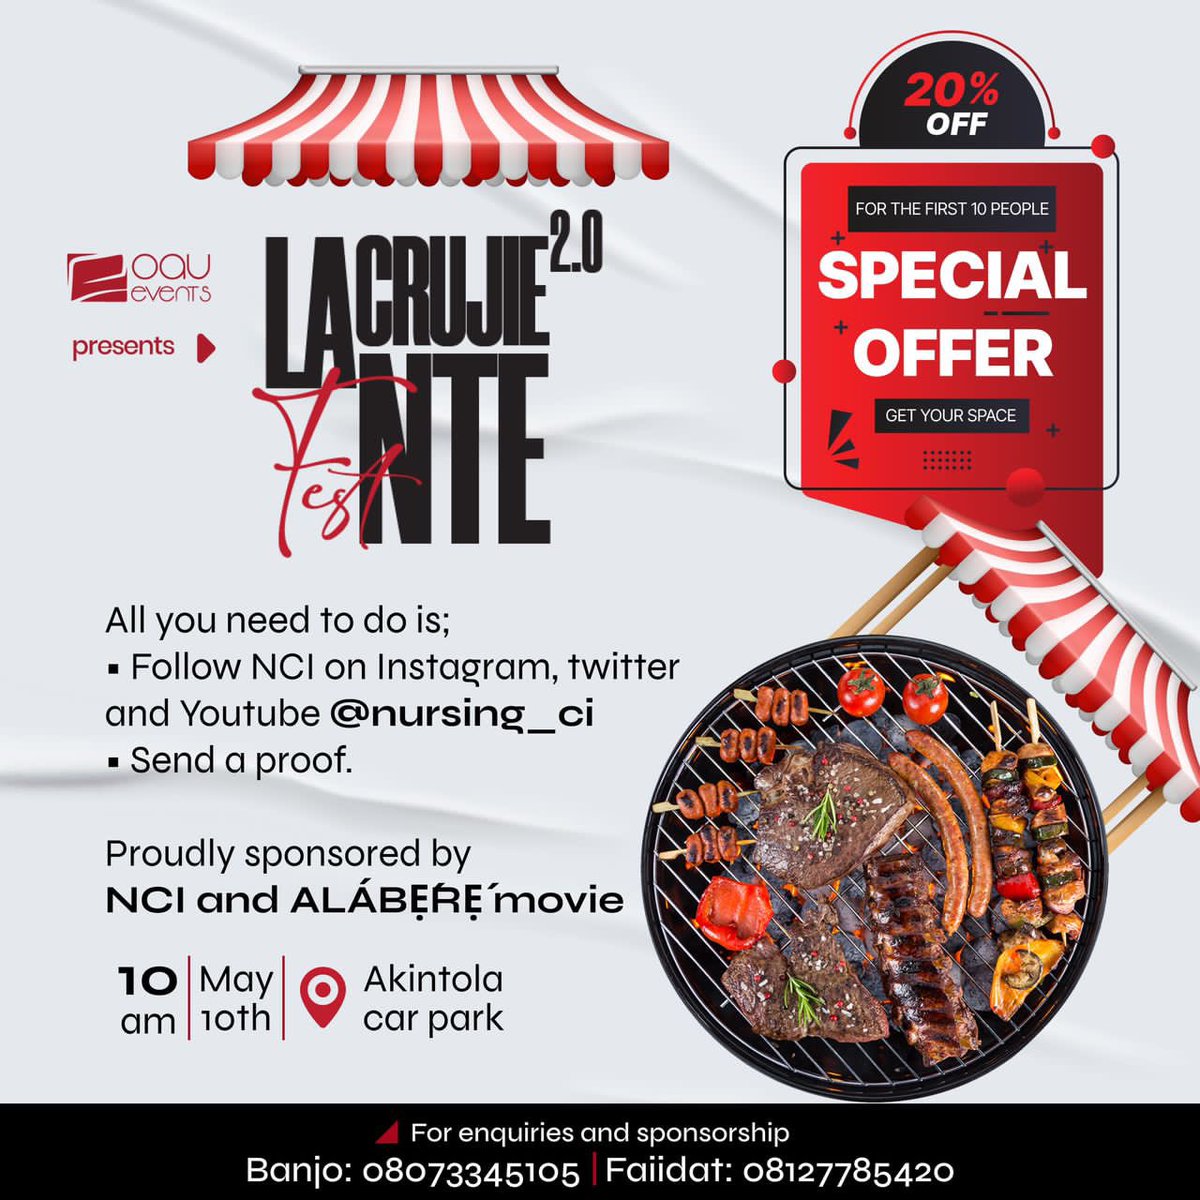 🎟️ Book a slot at our trade fair and get a whopping 20% discount! 🤩 But that's not all! This awesome deal is sponsored by the awesome folks at NCI Initiative and Alabere movie! 🎥

To claim your discount, all you have to do is follow NCI Studios on Instagram and Twitter 1/2